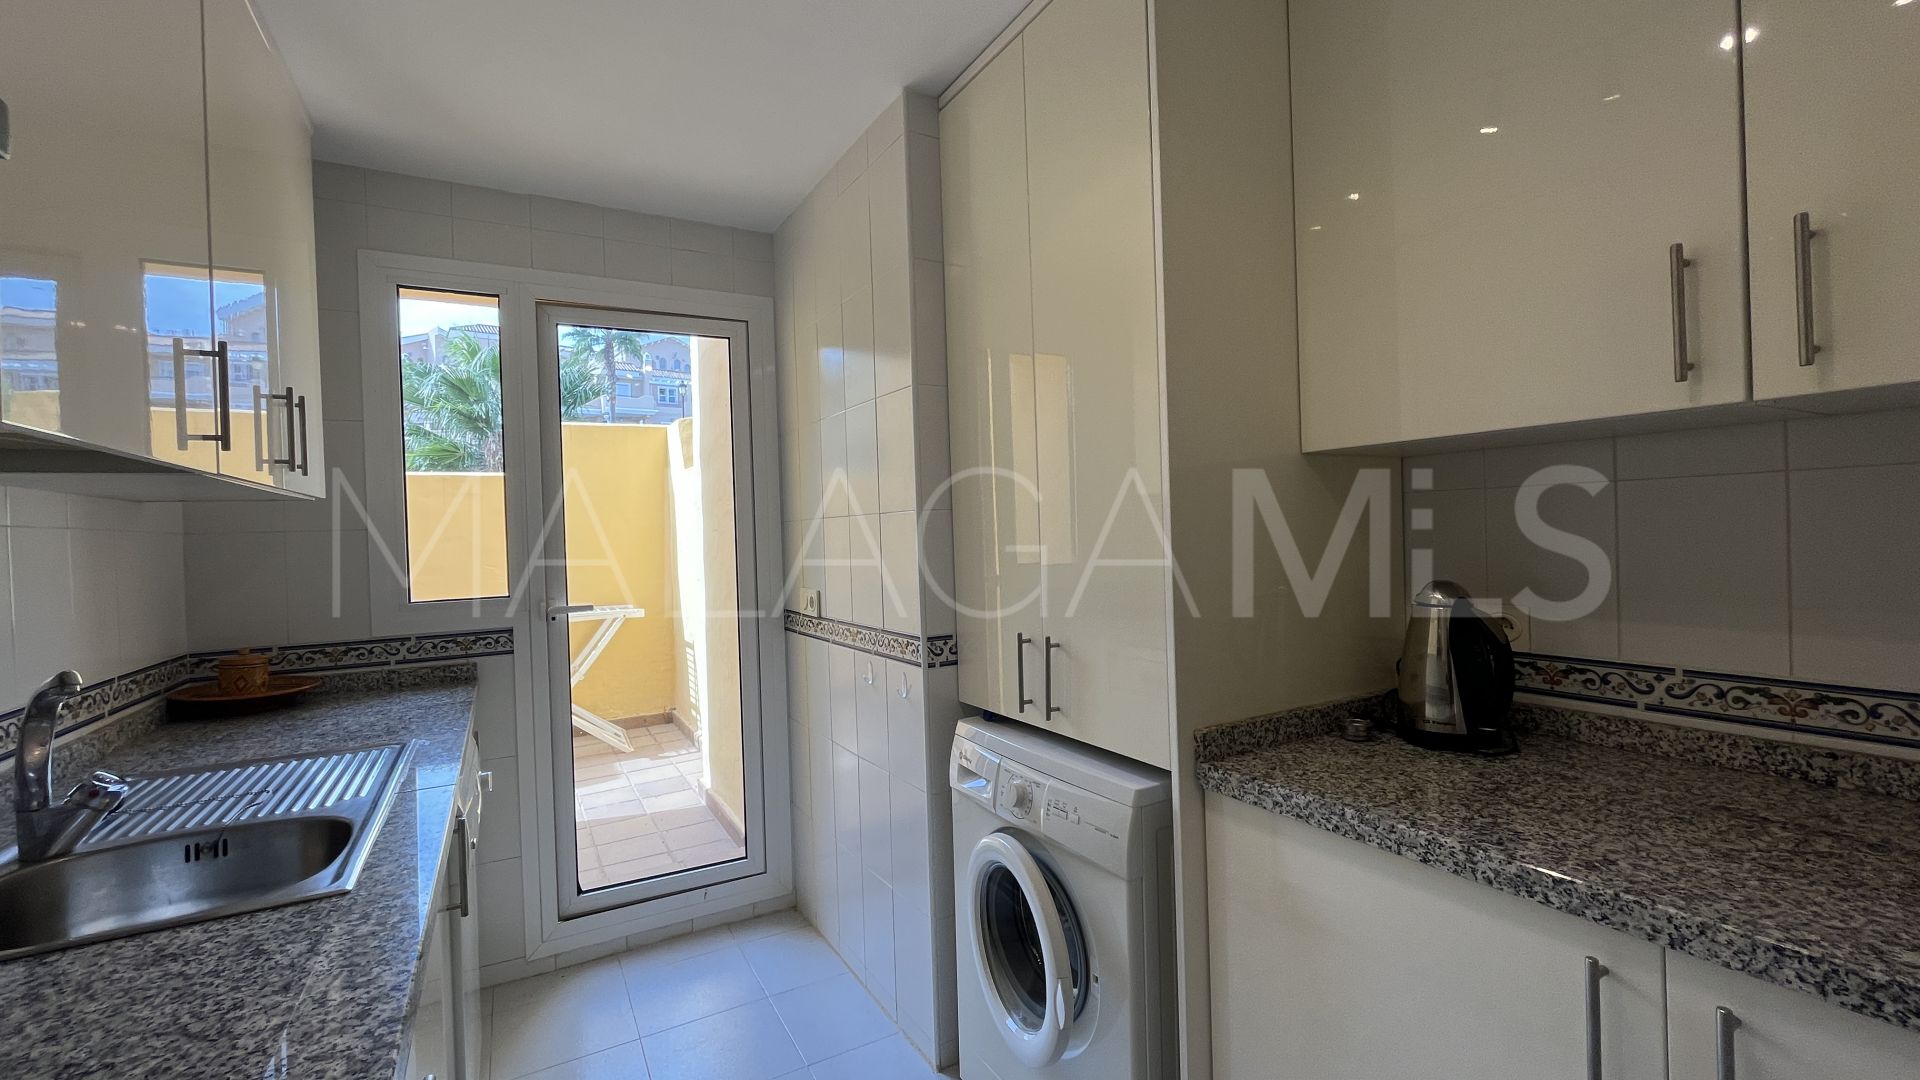 Atico with 2 bedrooms for sale in Duquesa Village